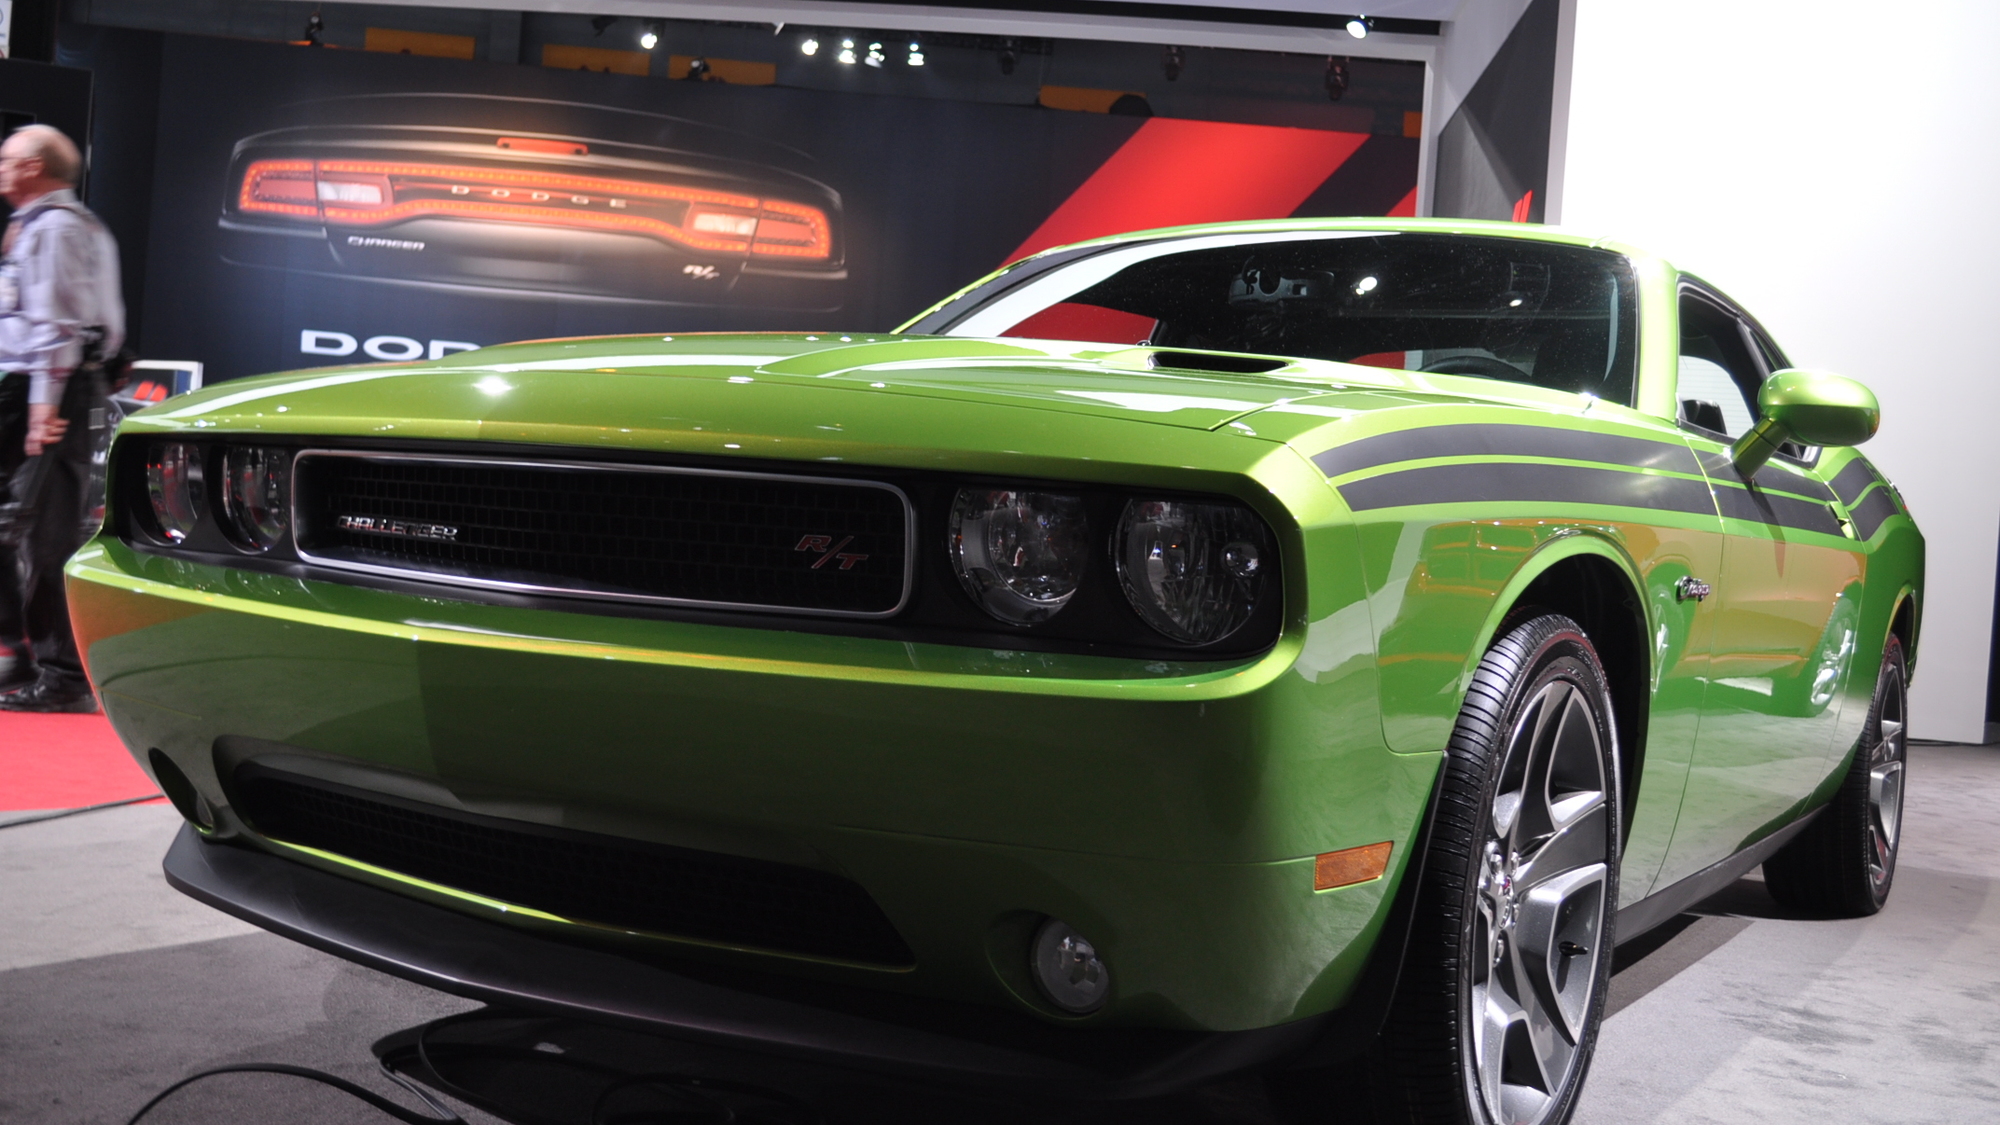 2011 Dodge Challenger R/T Green With Envy